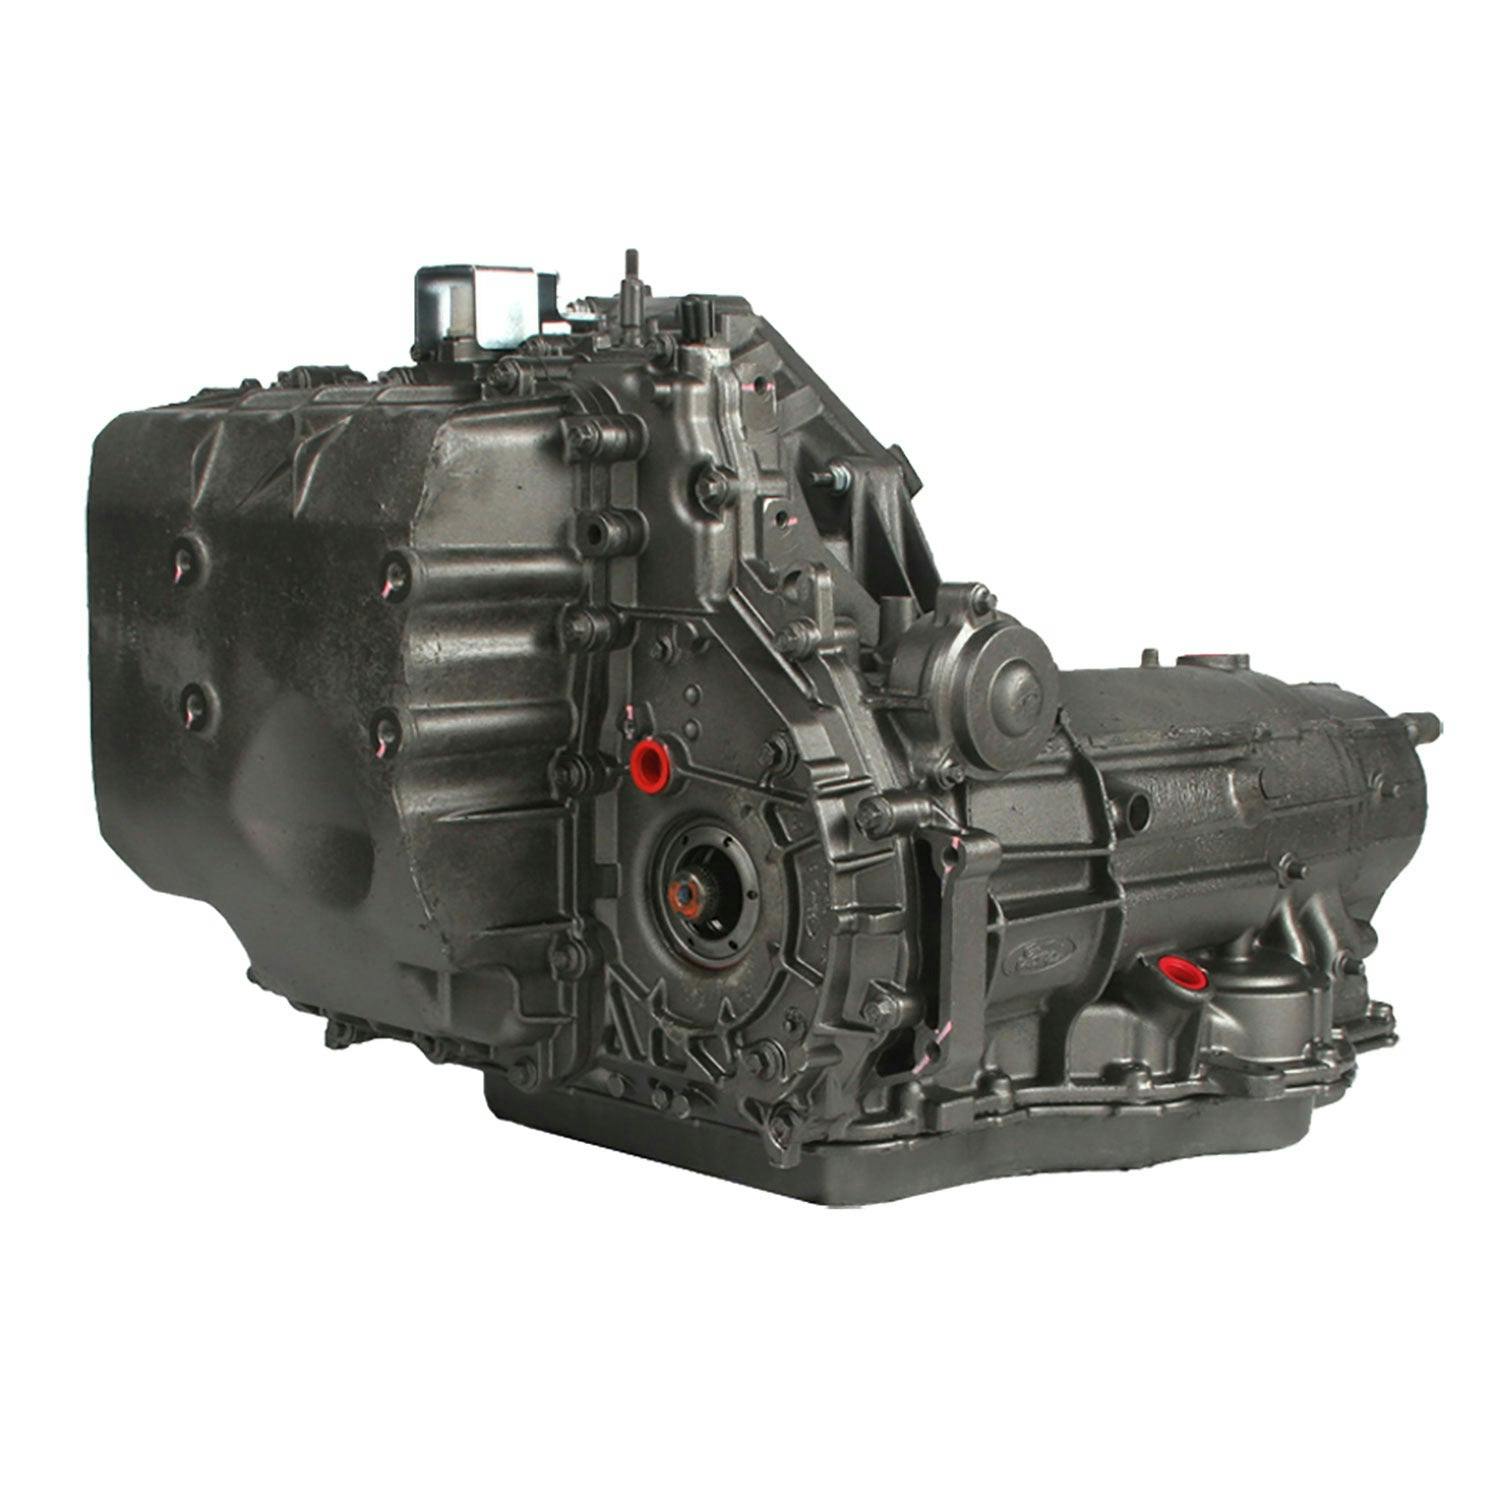 Automatic Transmission for 1996-1997 Ford Taurus/Mercury Sable FWD with 3L V6 Engine